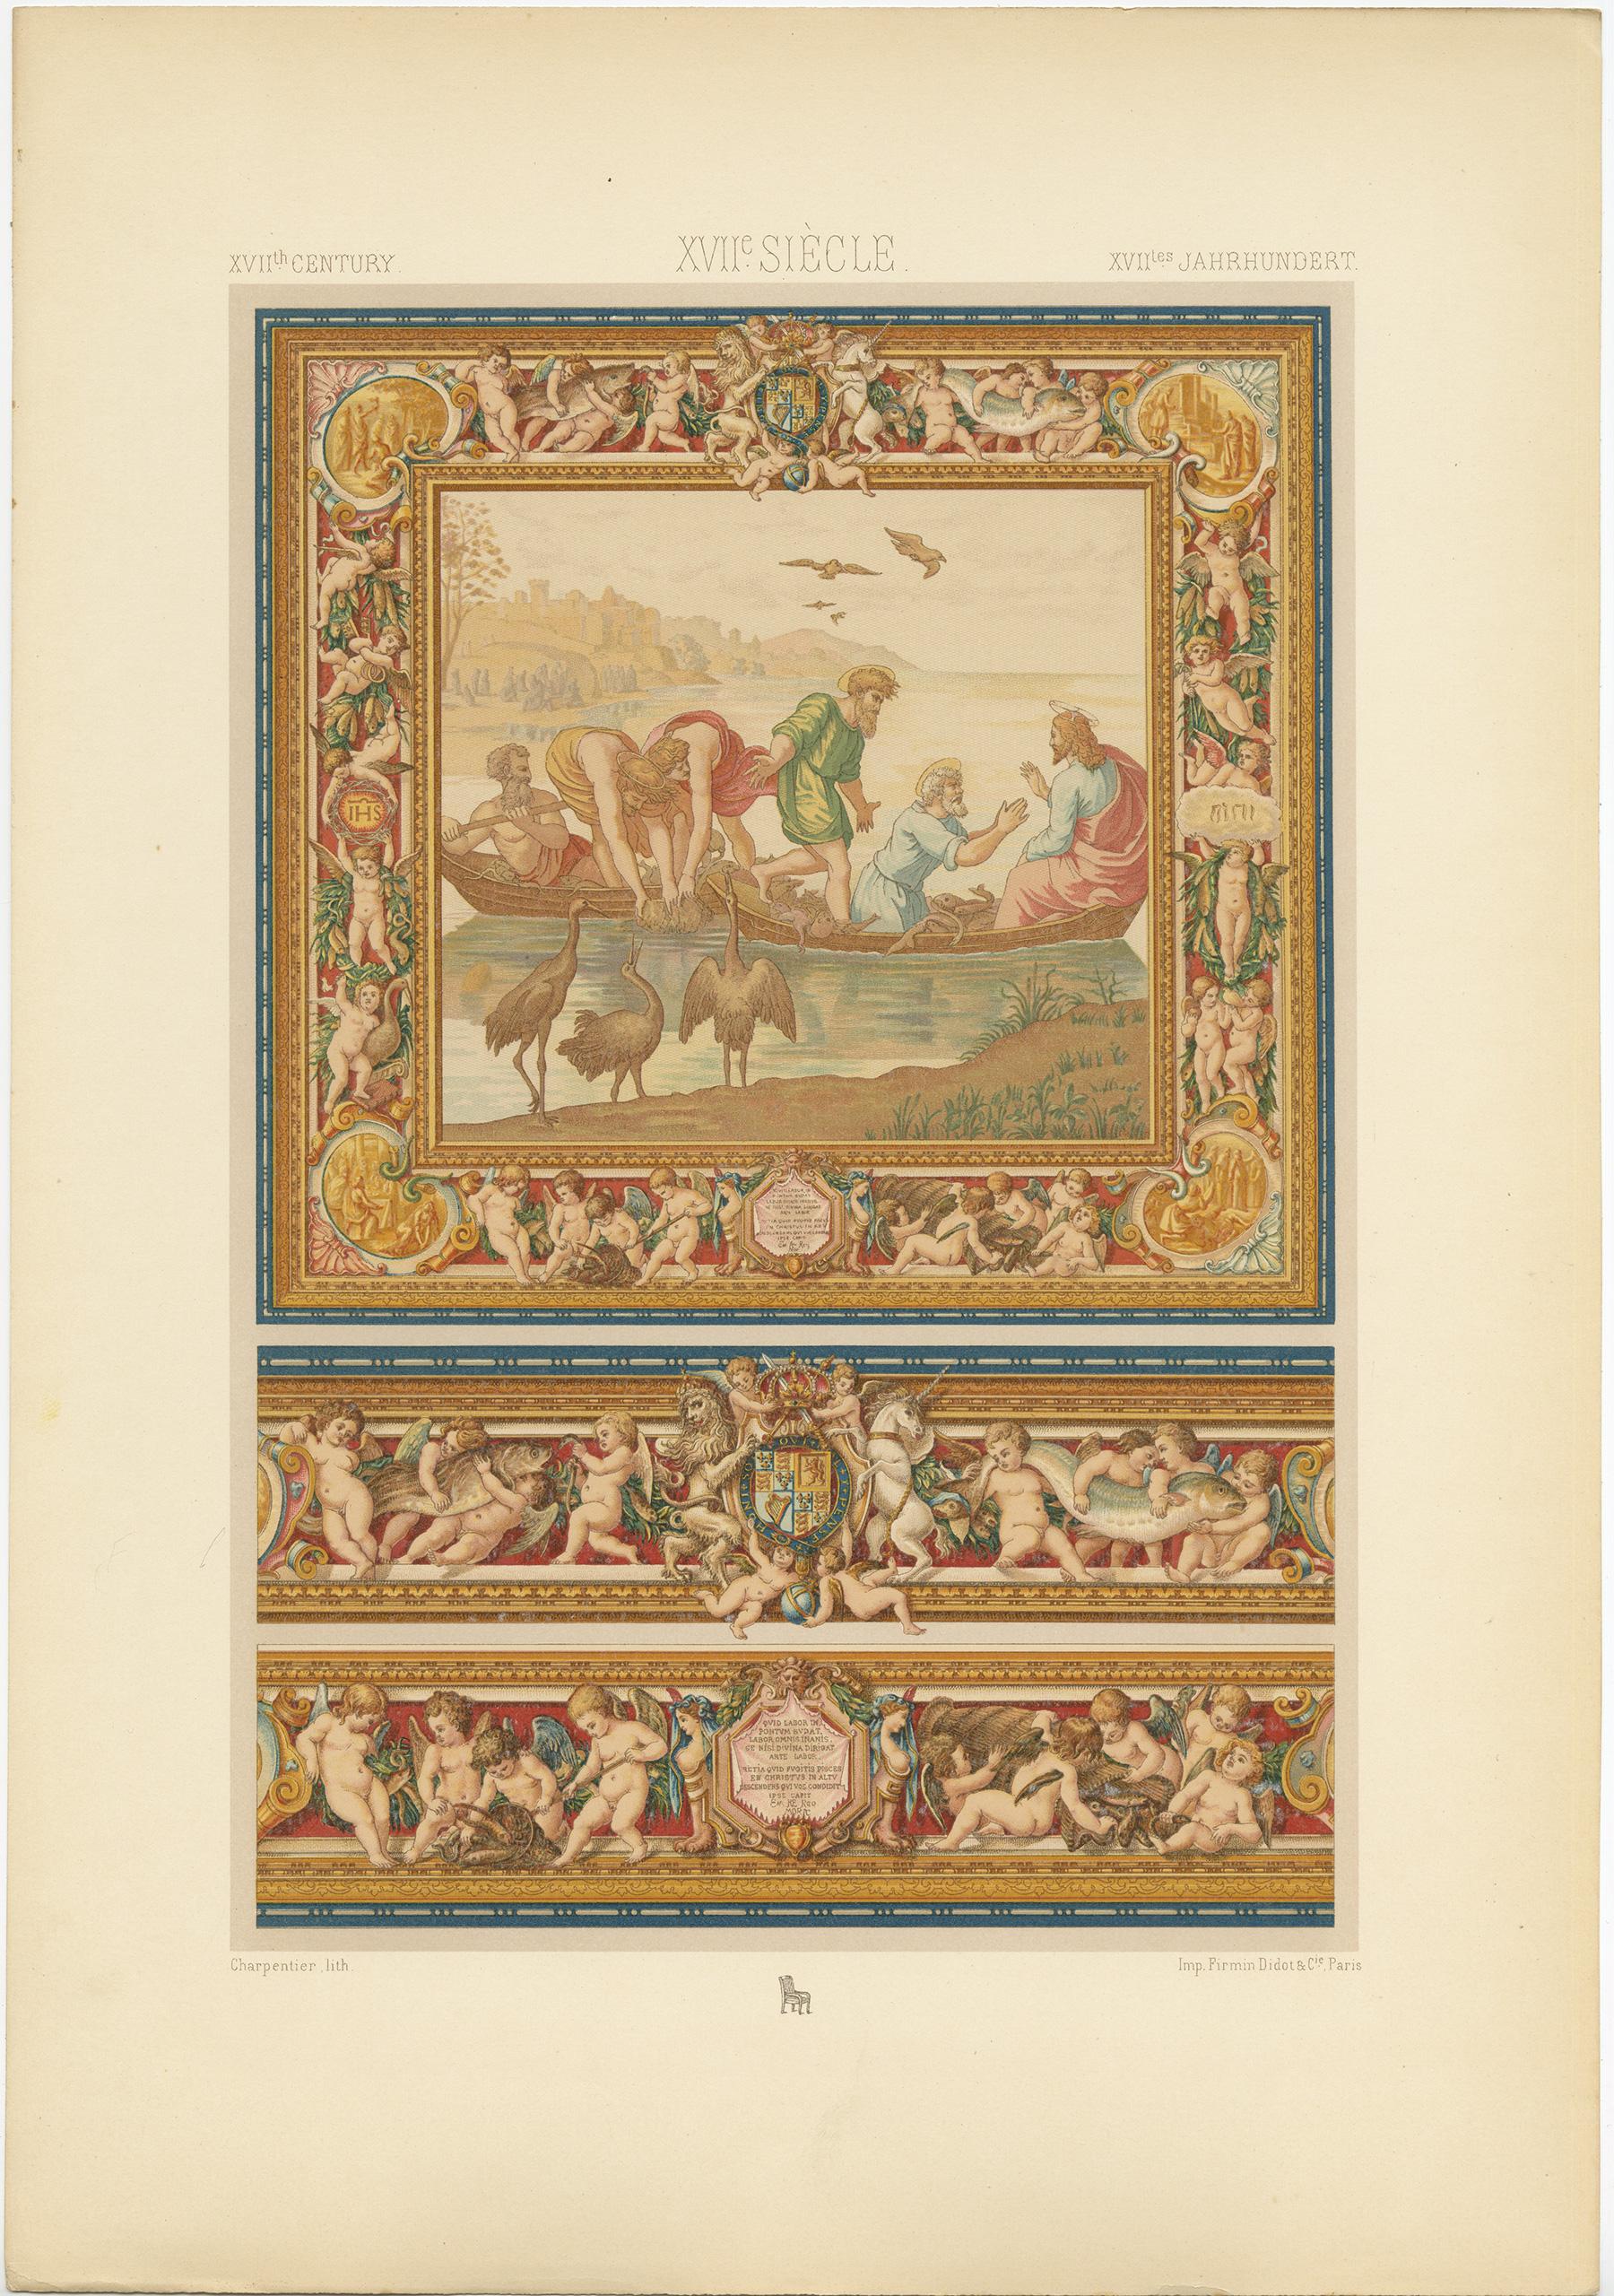 Antique print titled '17th Century - XVIIc Siècle - XVIILes Jahrhundert'. Chromolithograph of English tapestry said to have been given by James II to Louis XIV ornaments. This print originates from 'l'Ornement Polychrome' by Auguste Racinet.